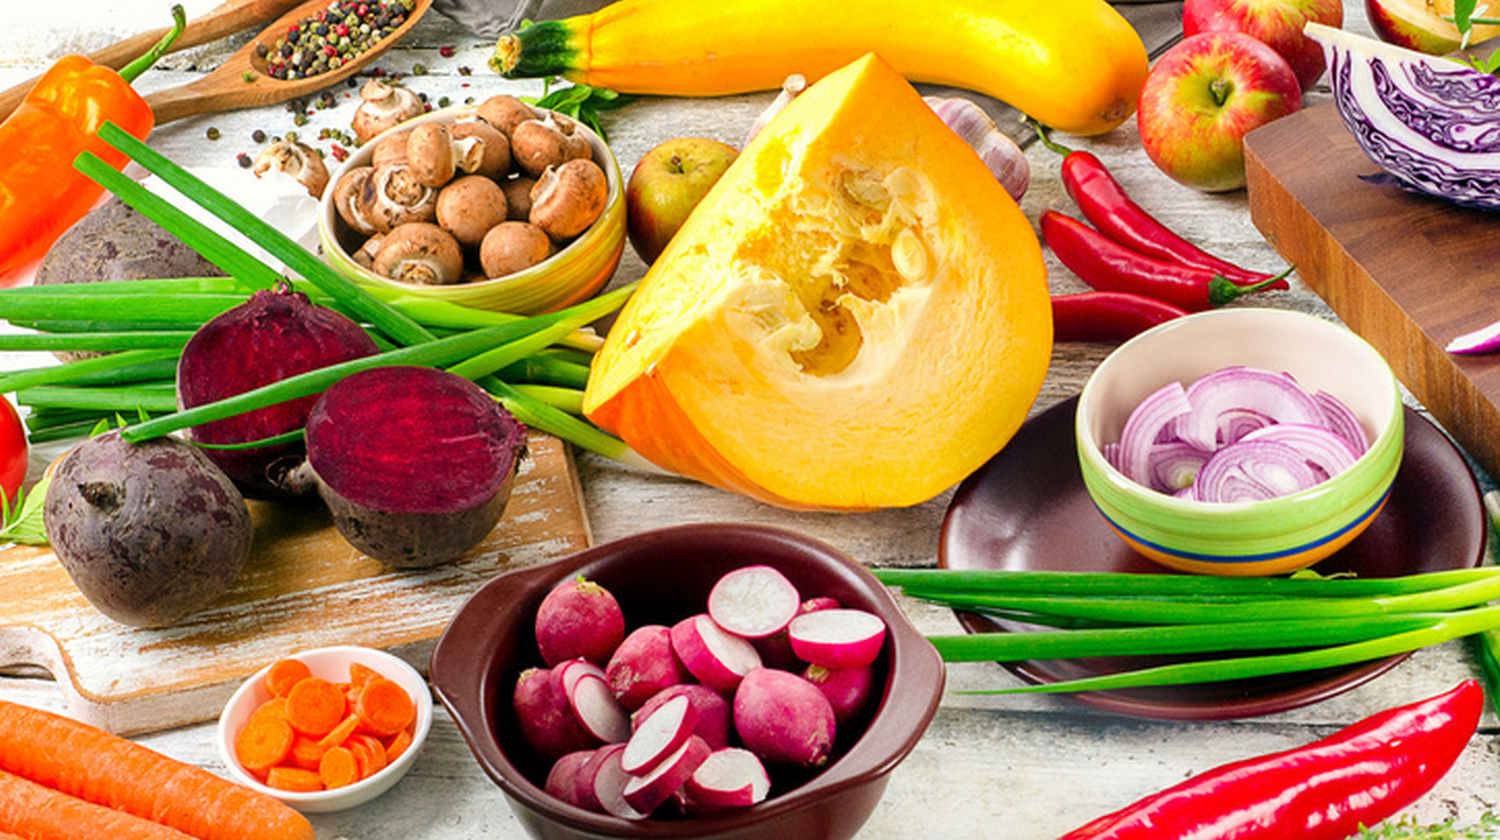 Top 12 Fresh Vegetables To Add To Your Diet